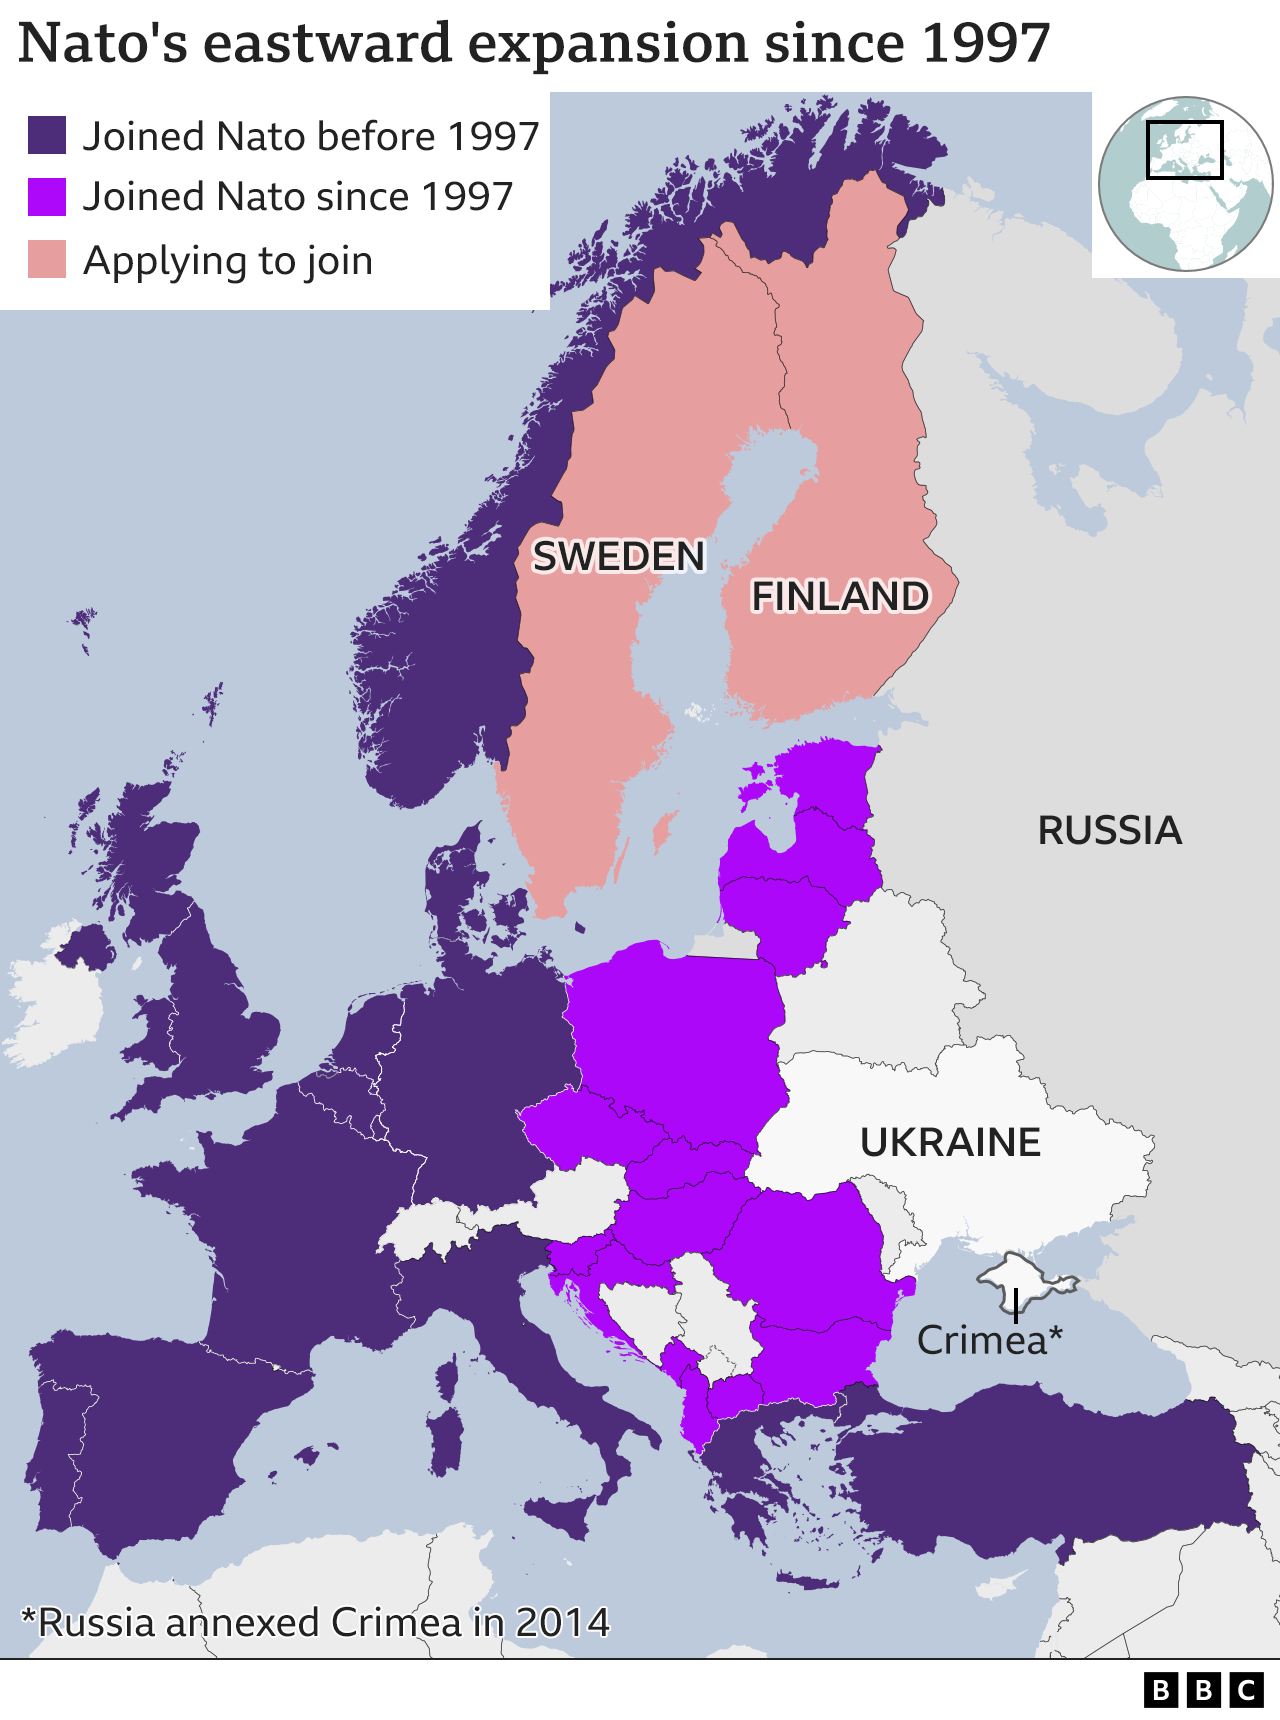 A BBC graphic showing Nato's eastward expansion since 1997